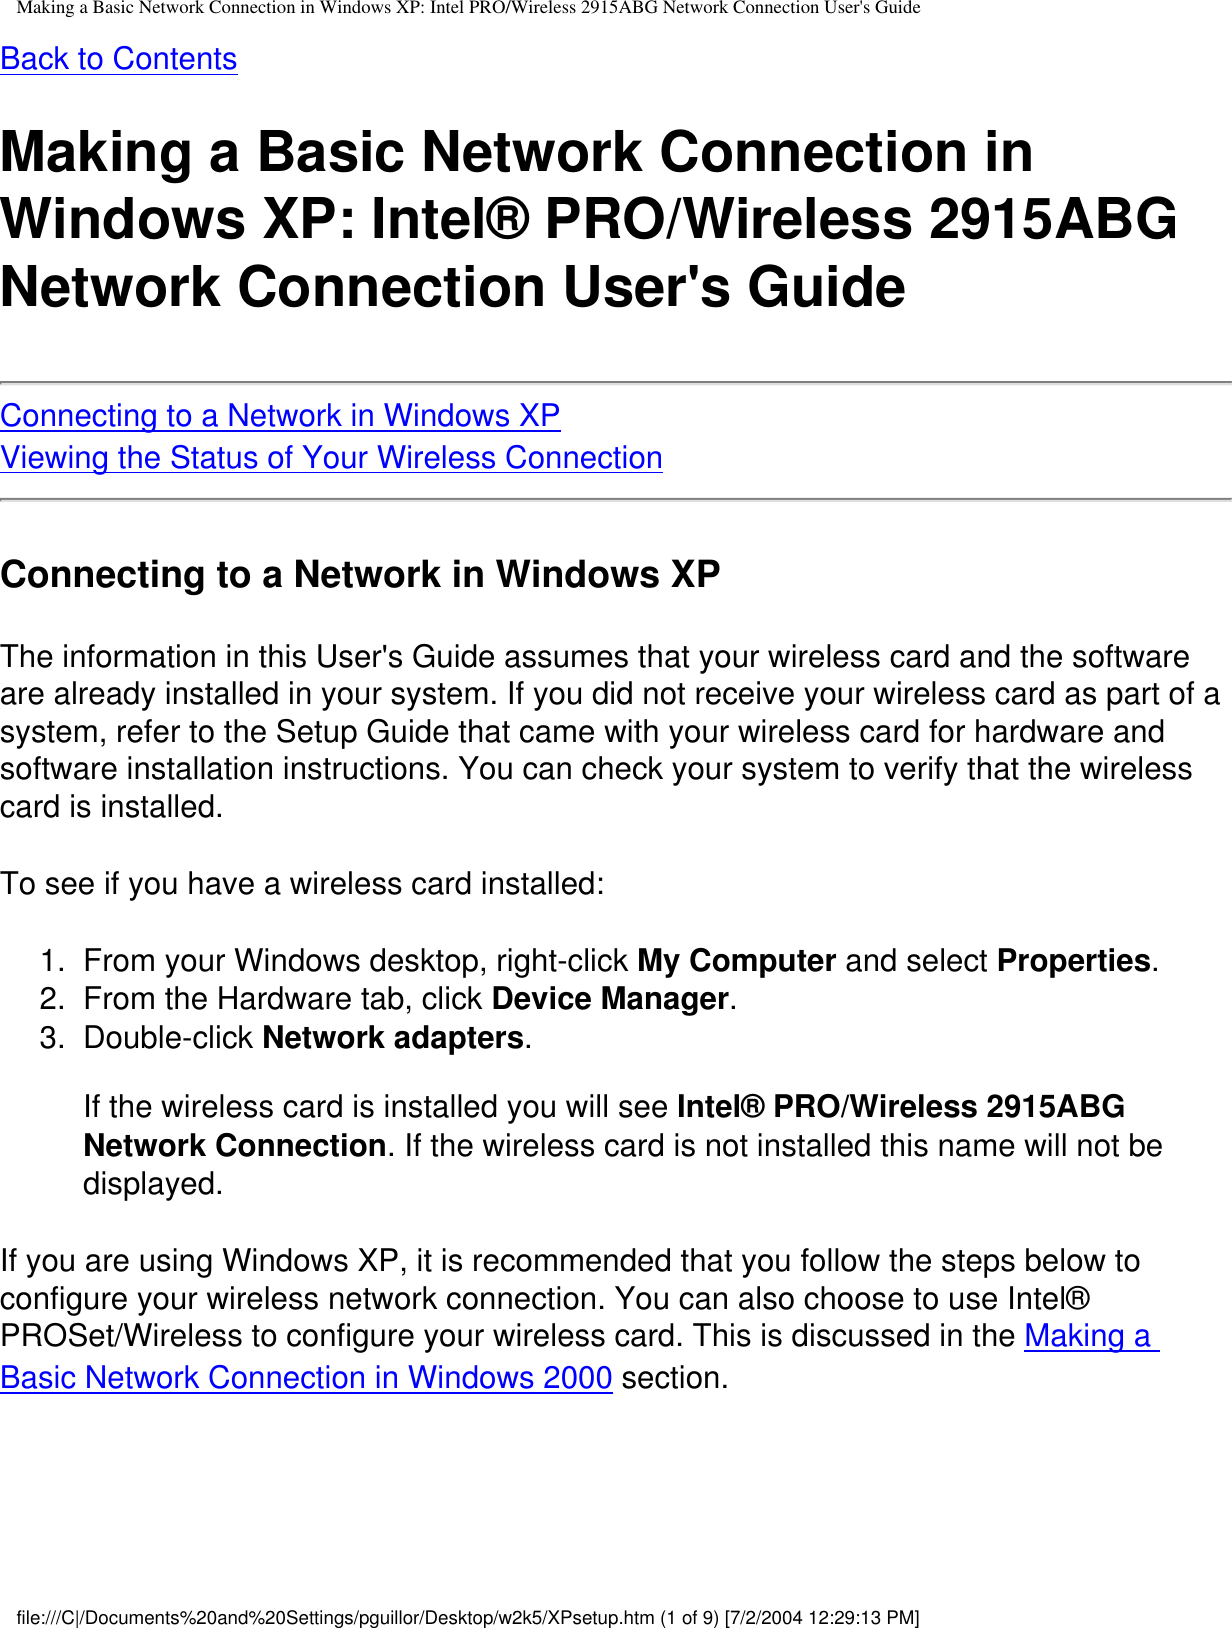 Making a Basic Network Connection in Windows XP: Intel PRO/Wireless 2915ABG Network Connection User&apos;s GuideBack to ContentsMaking a Basic Network Connection in Windows XP: Intel® PRO/Wireless 2915ABG Network Connection User&apos;s GuideConnecting to a Network in Windows XPViewing the Status of Your Wireless ConnectionConnecting to a Network in Windows XPThe information in this User&apos;s Guide assumes that your wireless card and the software are already installed in your system. If you did not receive your wireless card as part of a system, refer to the Setup Guide that came with your wireless card for hardware and software installation instructions. You can check your system to verify that the wireless card is installed.To see if you have a wireless card installed:1.  From your Windows desktop, right-click My Computer and select Properties.2.  From the Hardware tab, click Device Manager.3.  Double-click Network adapters.If the wireless card is installed you will see Intel® PRO/Wireless 2915ABG Network Connection. If the wireless card is not installed this name will not be displayed. If you are using Windows XP, it is recommended that you follow the steps below to configure your wireless network connection. You can also choose to use Intel® PROSet/Wireless to configure your wireless card. This is discussed in the Making a Basic Network Connection in Windows 2000 section.file:///C|/Documents%20and%20Settings/pguillor/Desktop/w2k5/XPsetup.htm (1 of 9) [7/2/2004 12:29:13 PM]